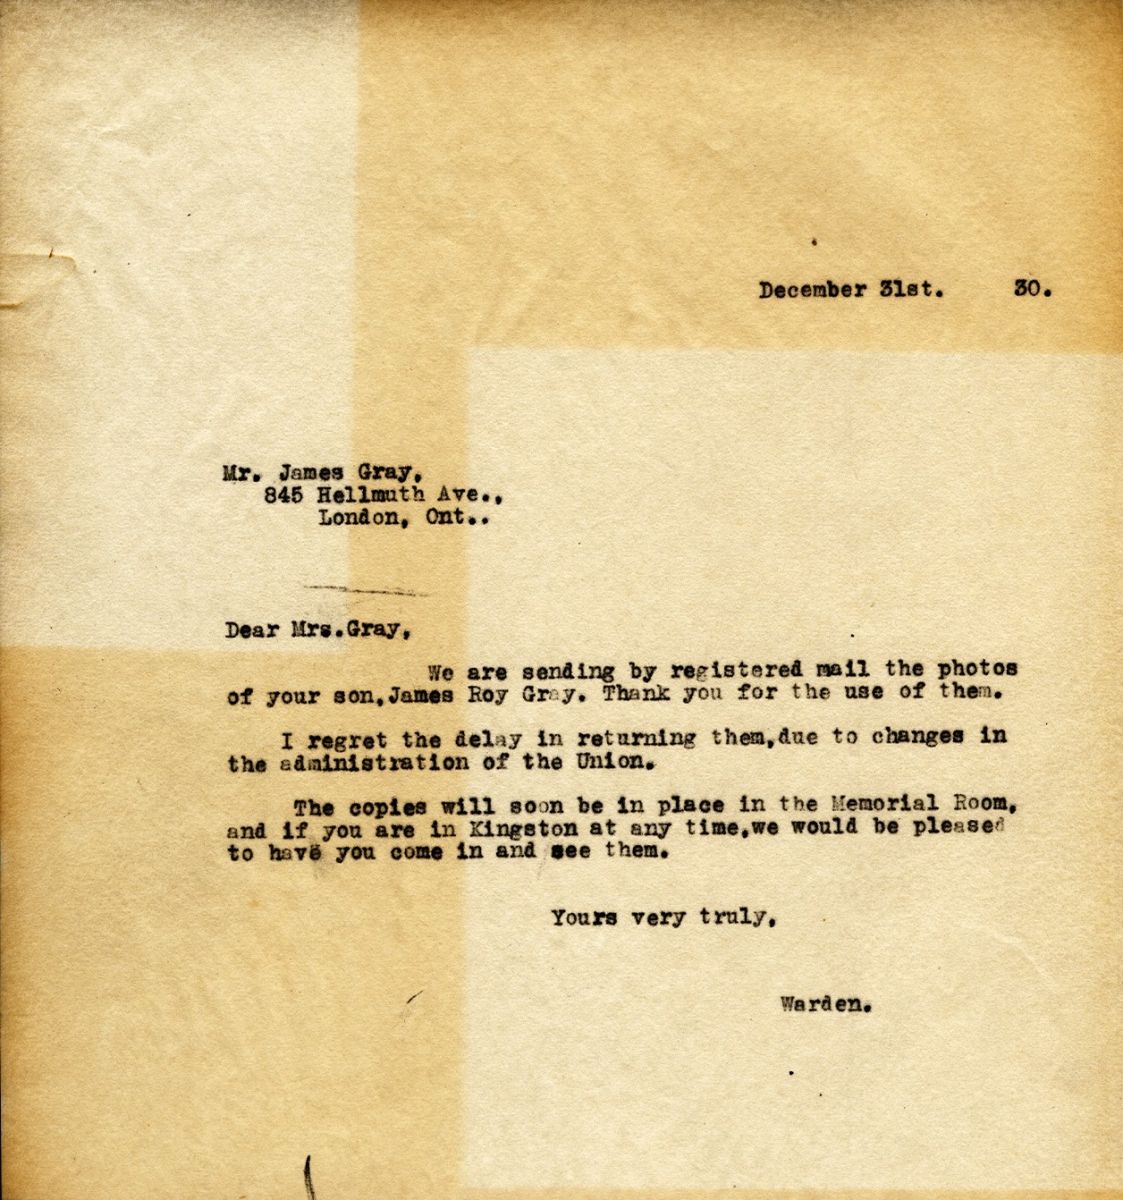 Letter from the Warden to Mr. James Gray, 31st December 1930